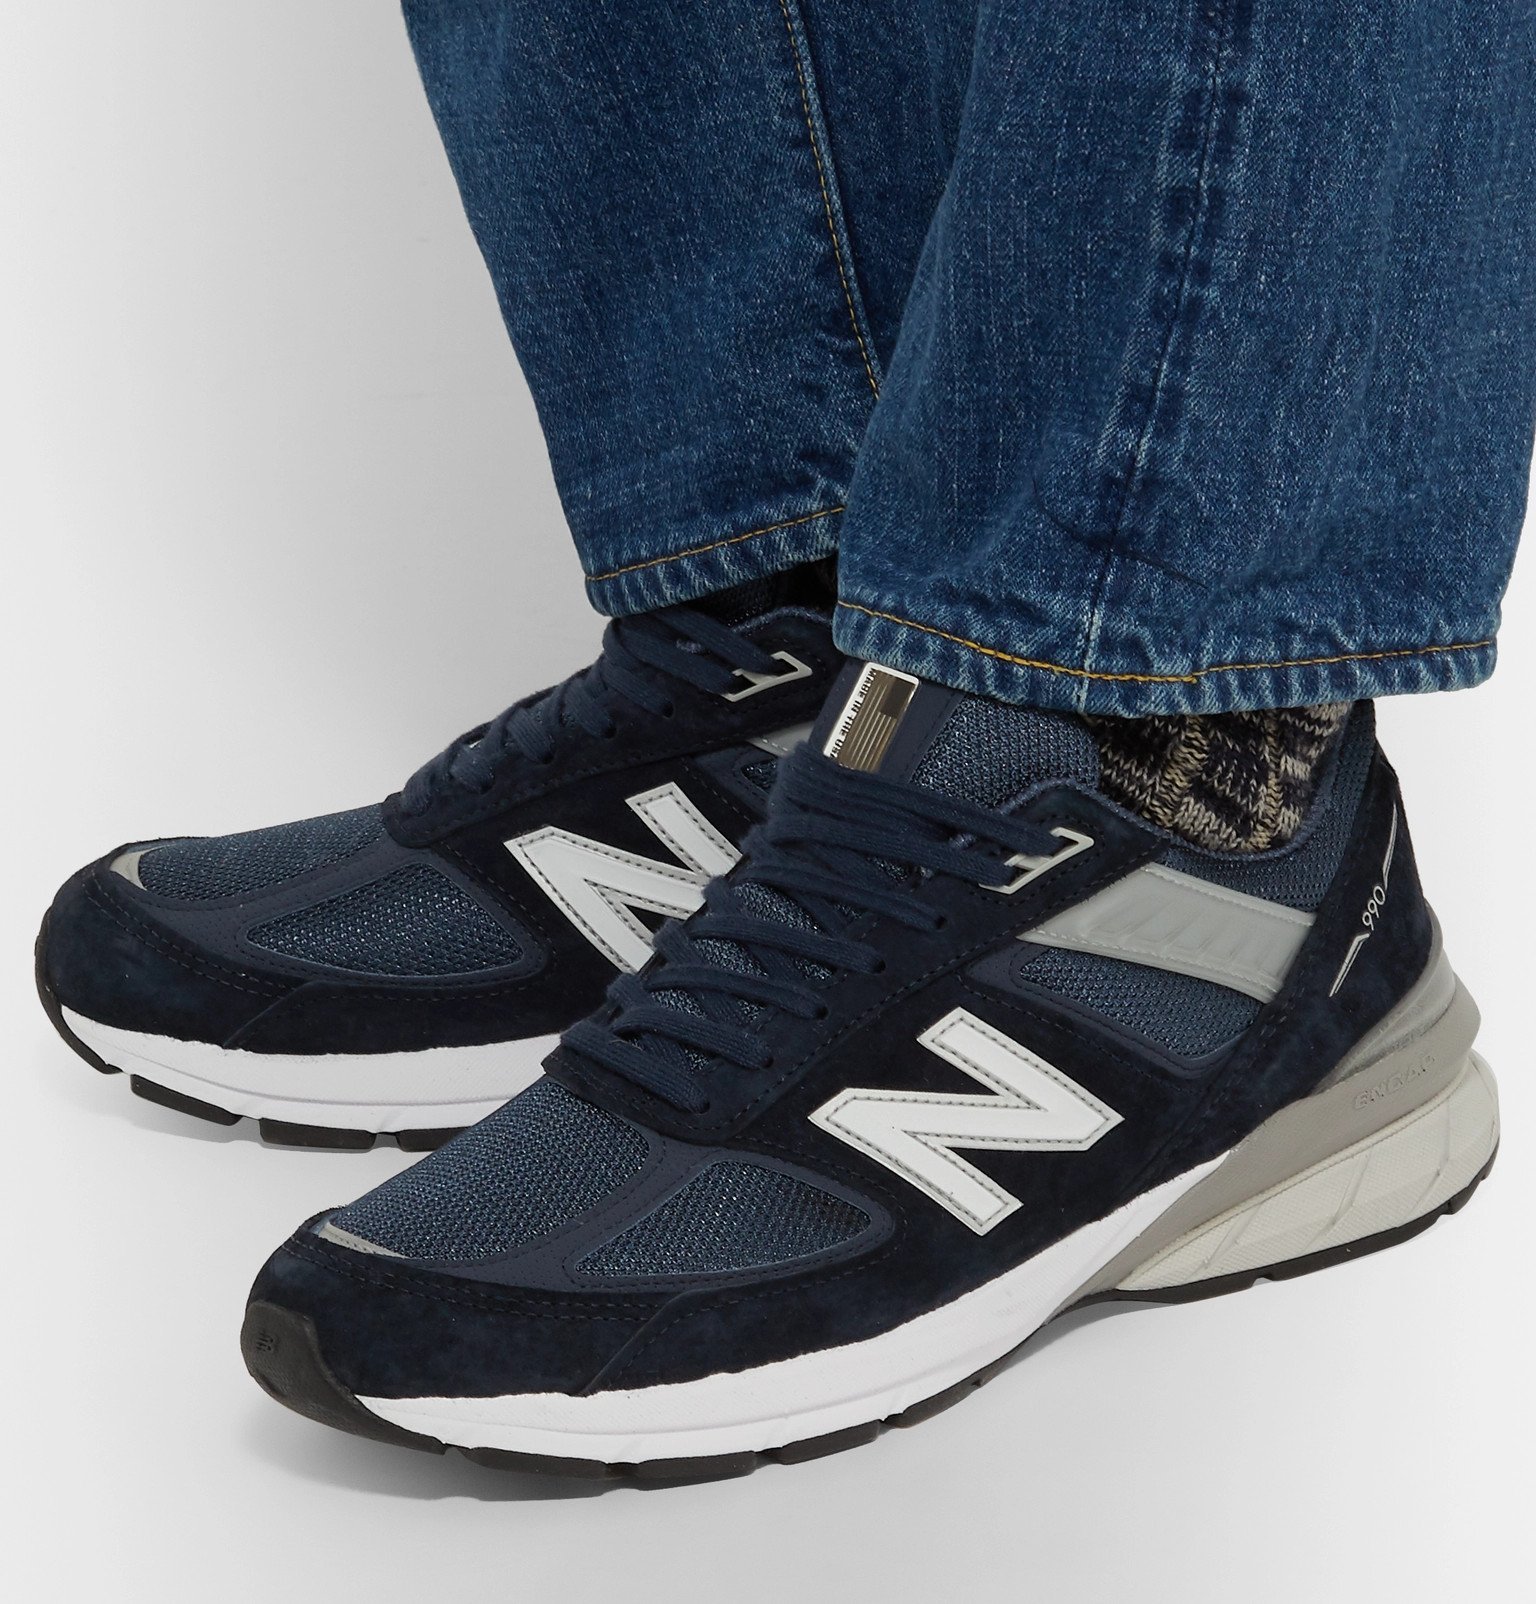 new balance 990 with jeans